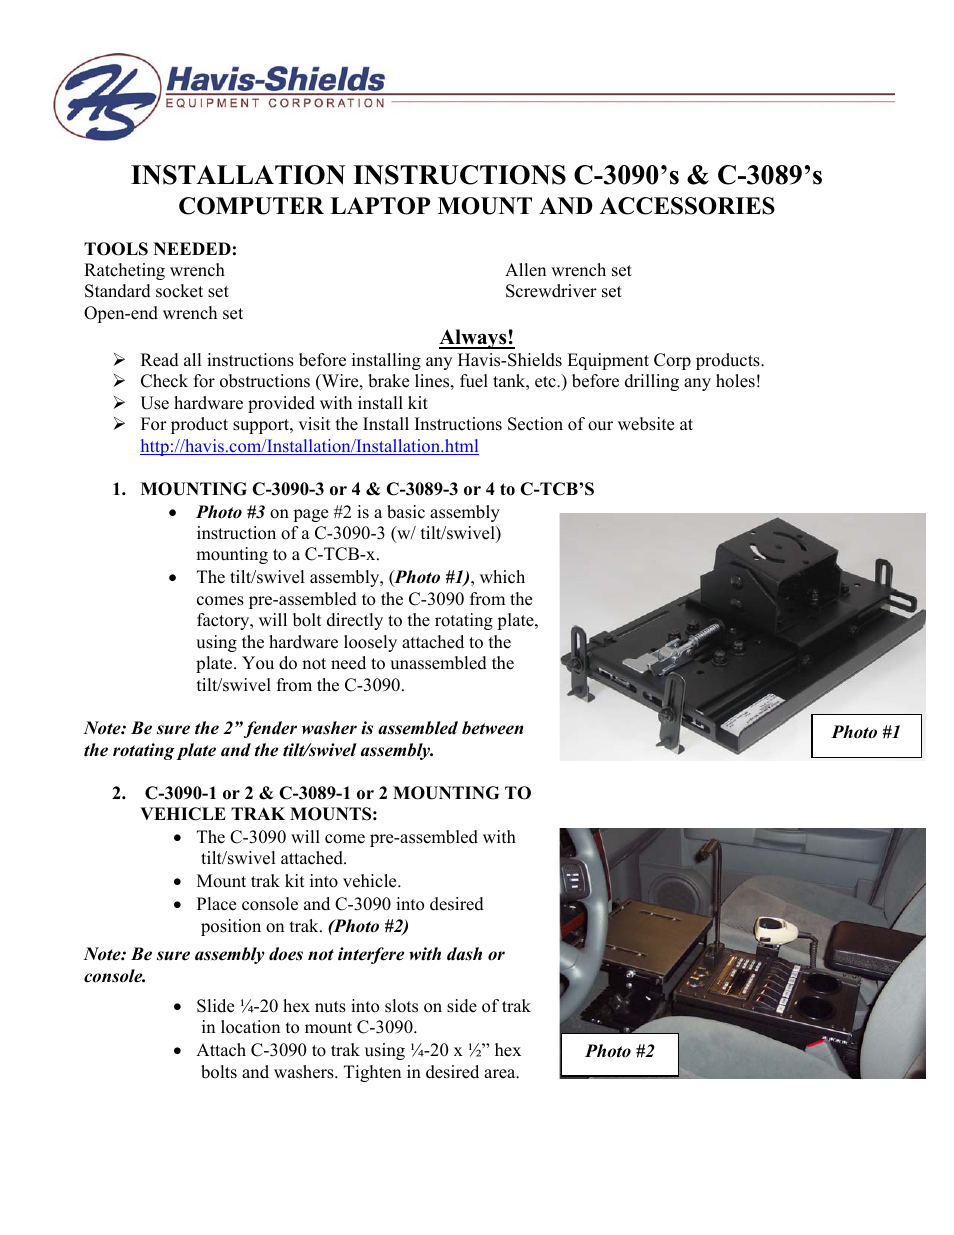 Computer Laptop Mount and Accessories C-3090's